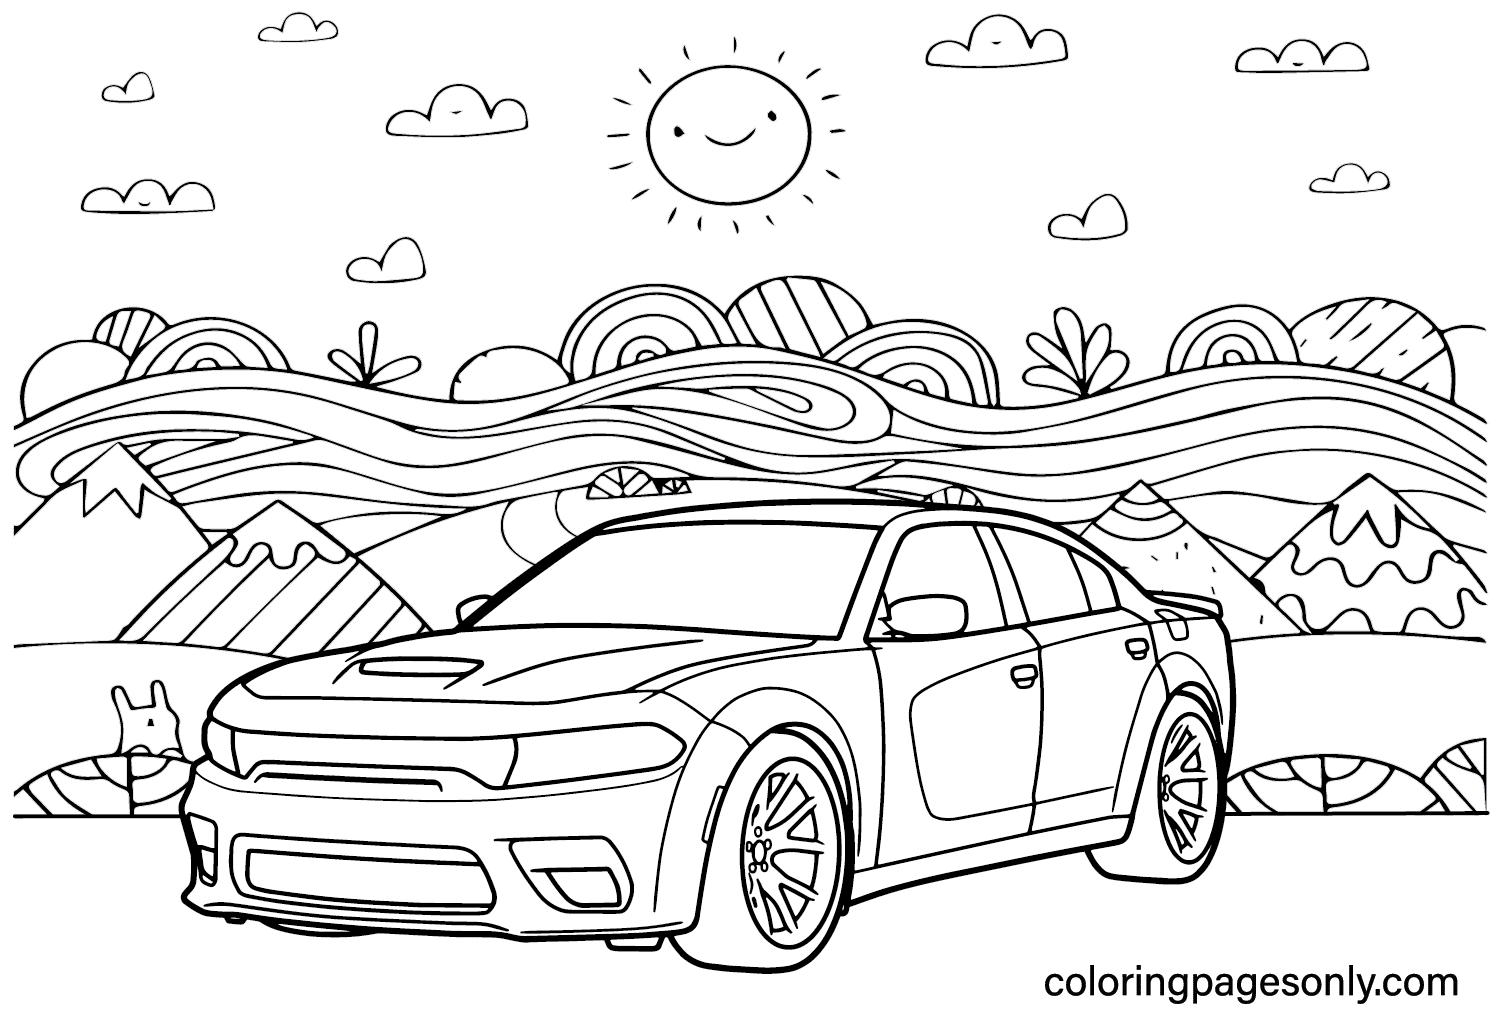 Dodge coloring pages